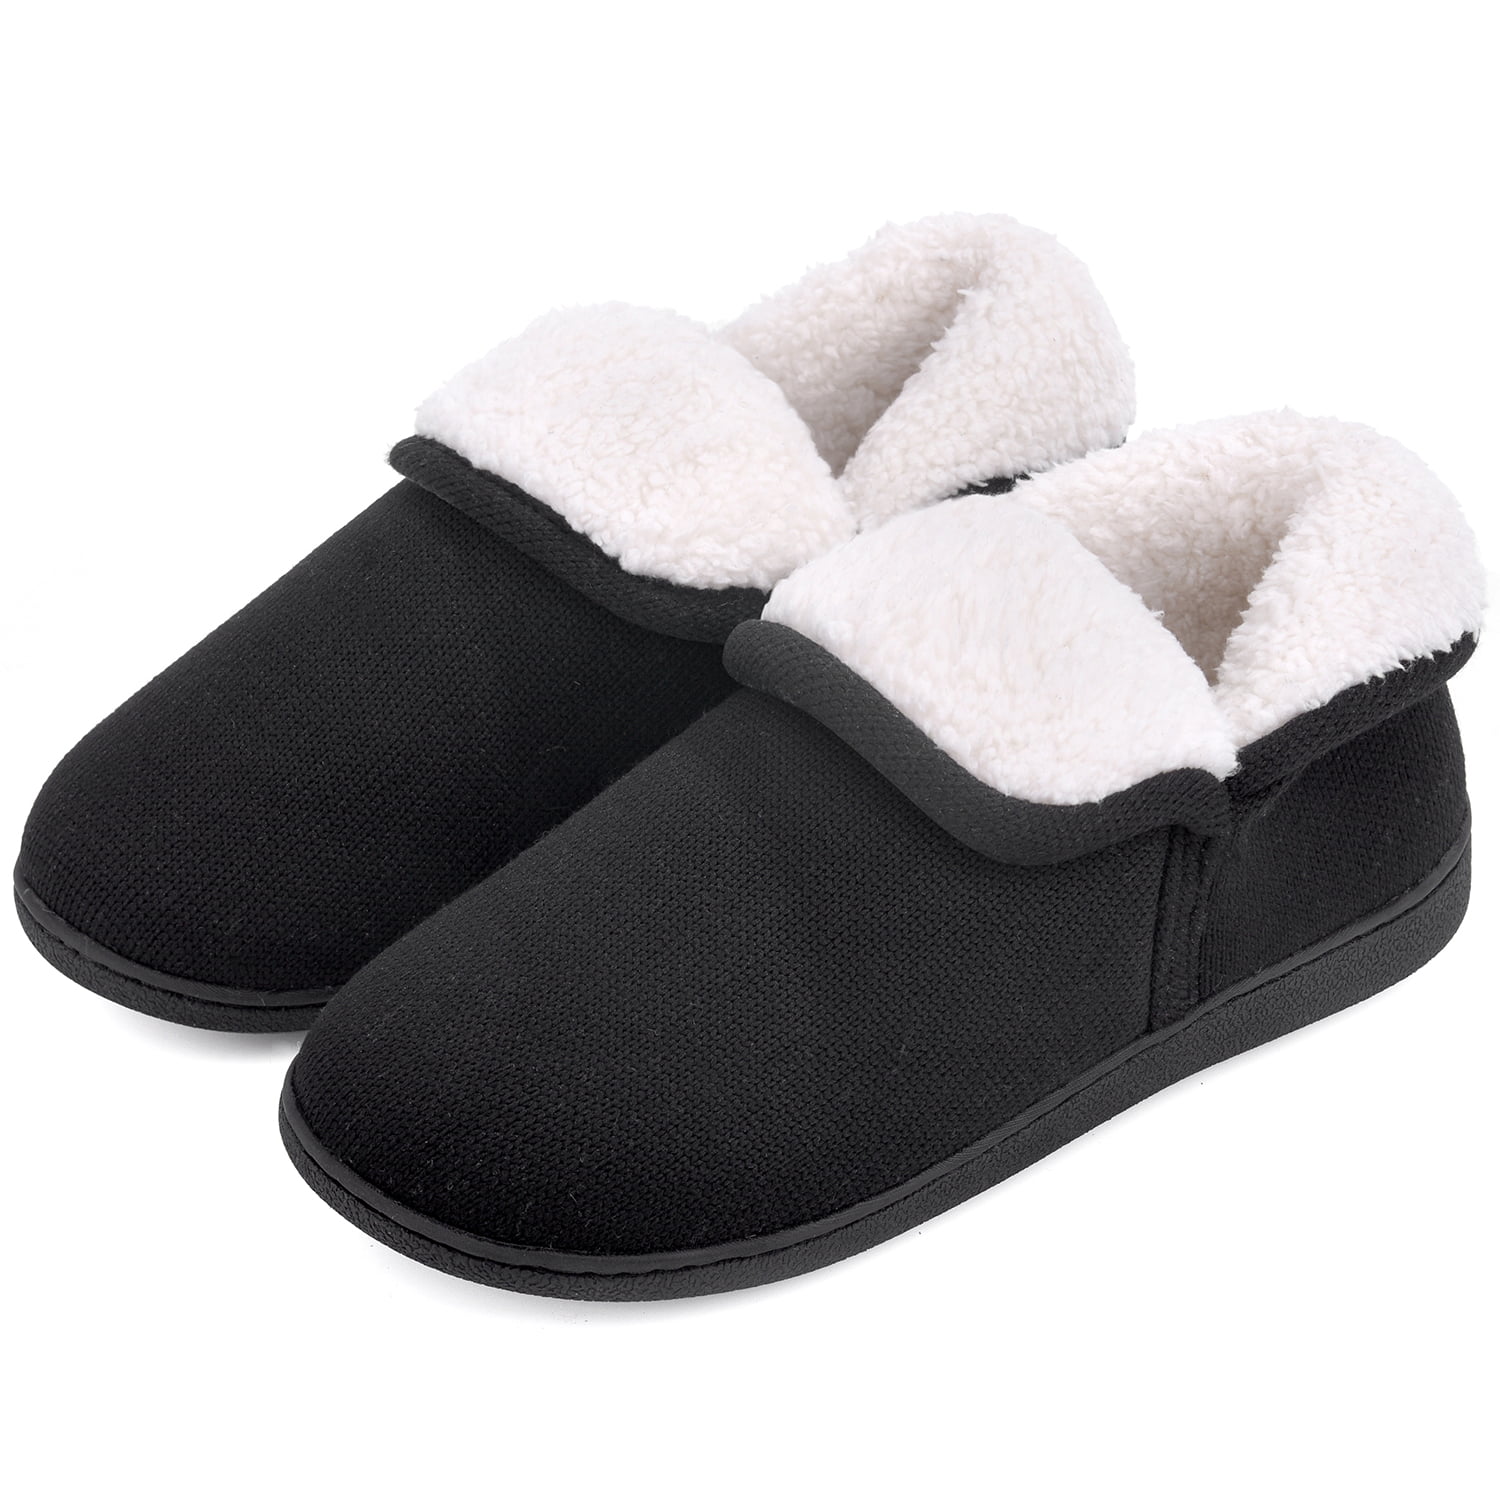 Vonmay - Women's Fuzzy Slippers Boots Memory Foam Booties House Shoes ...